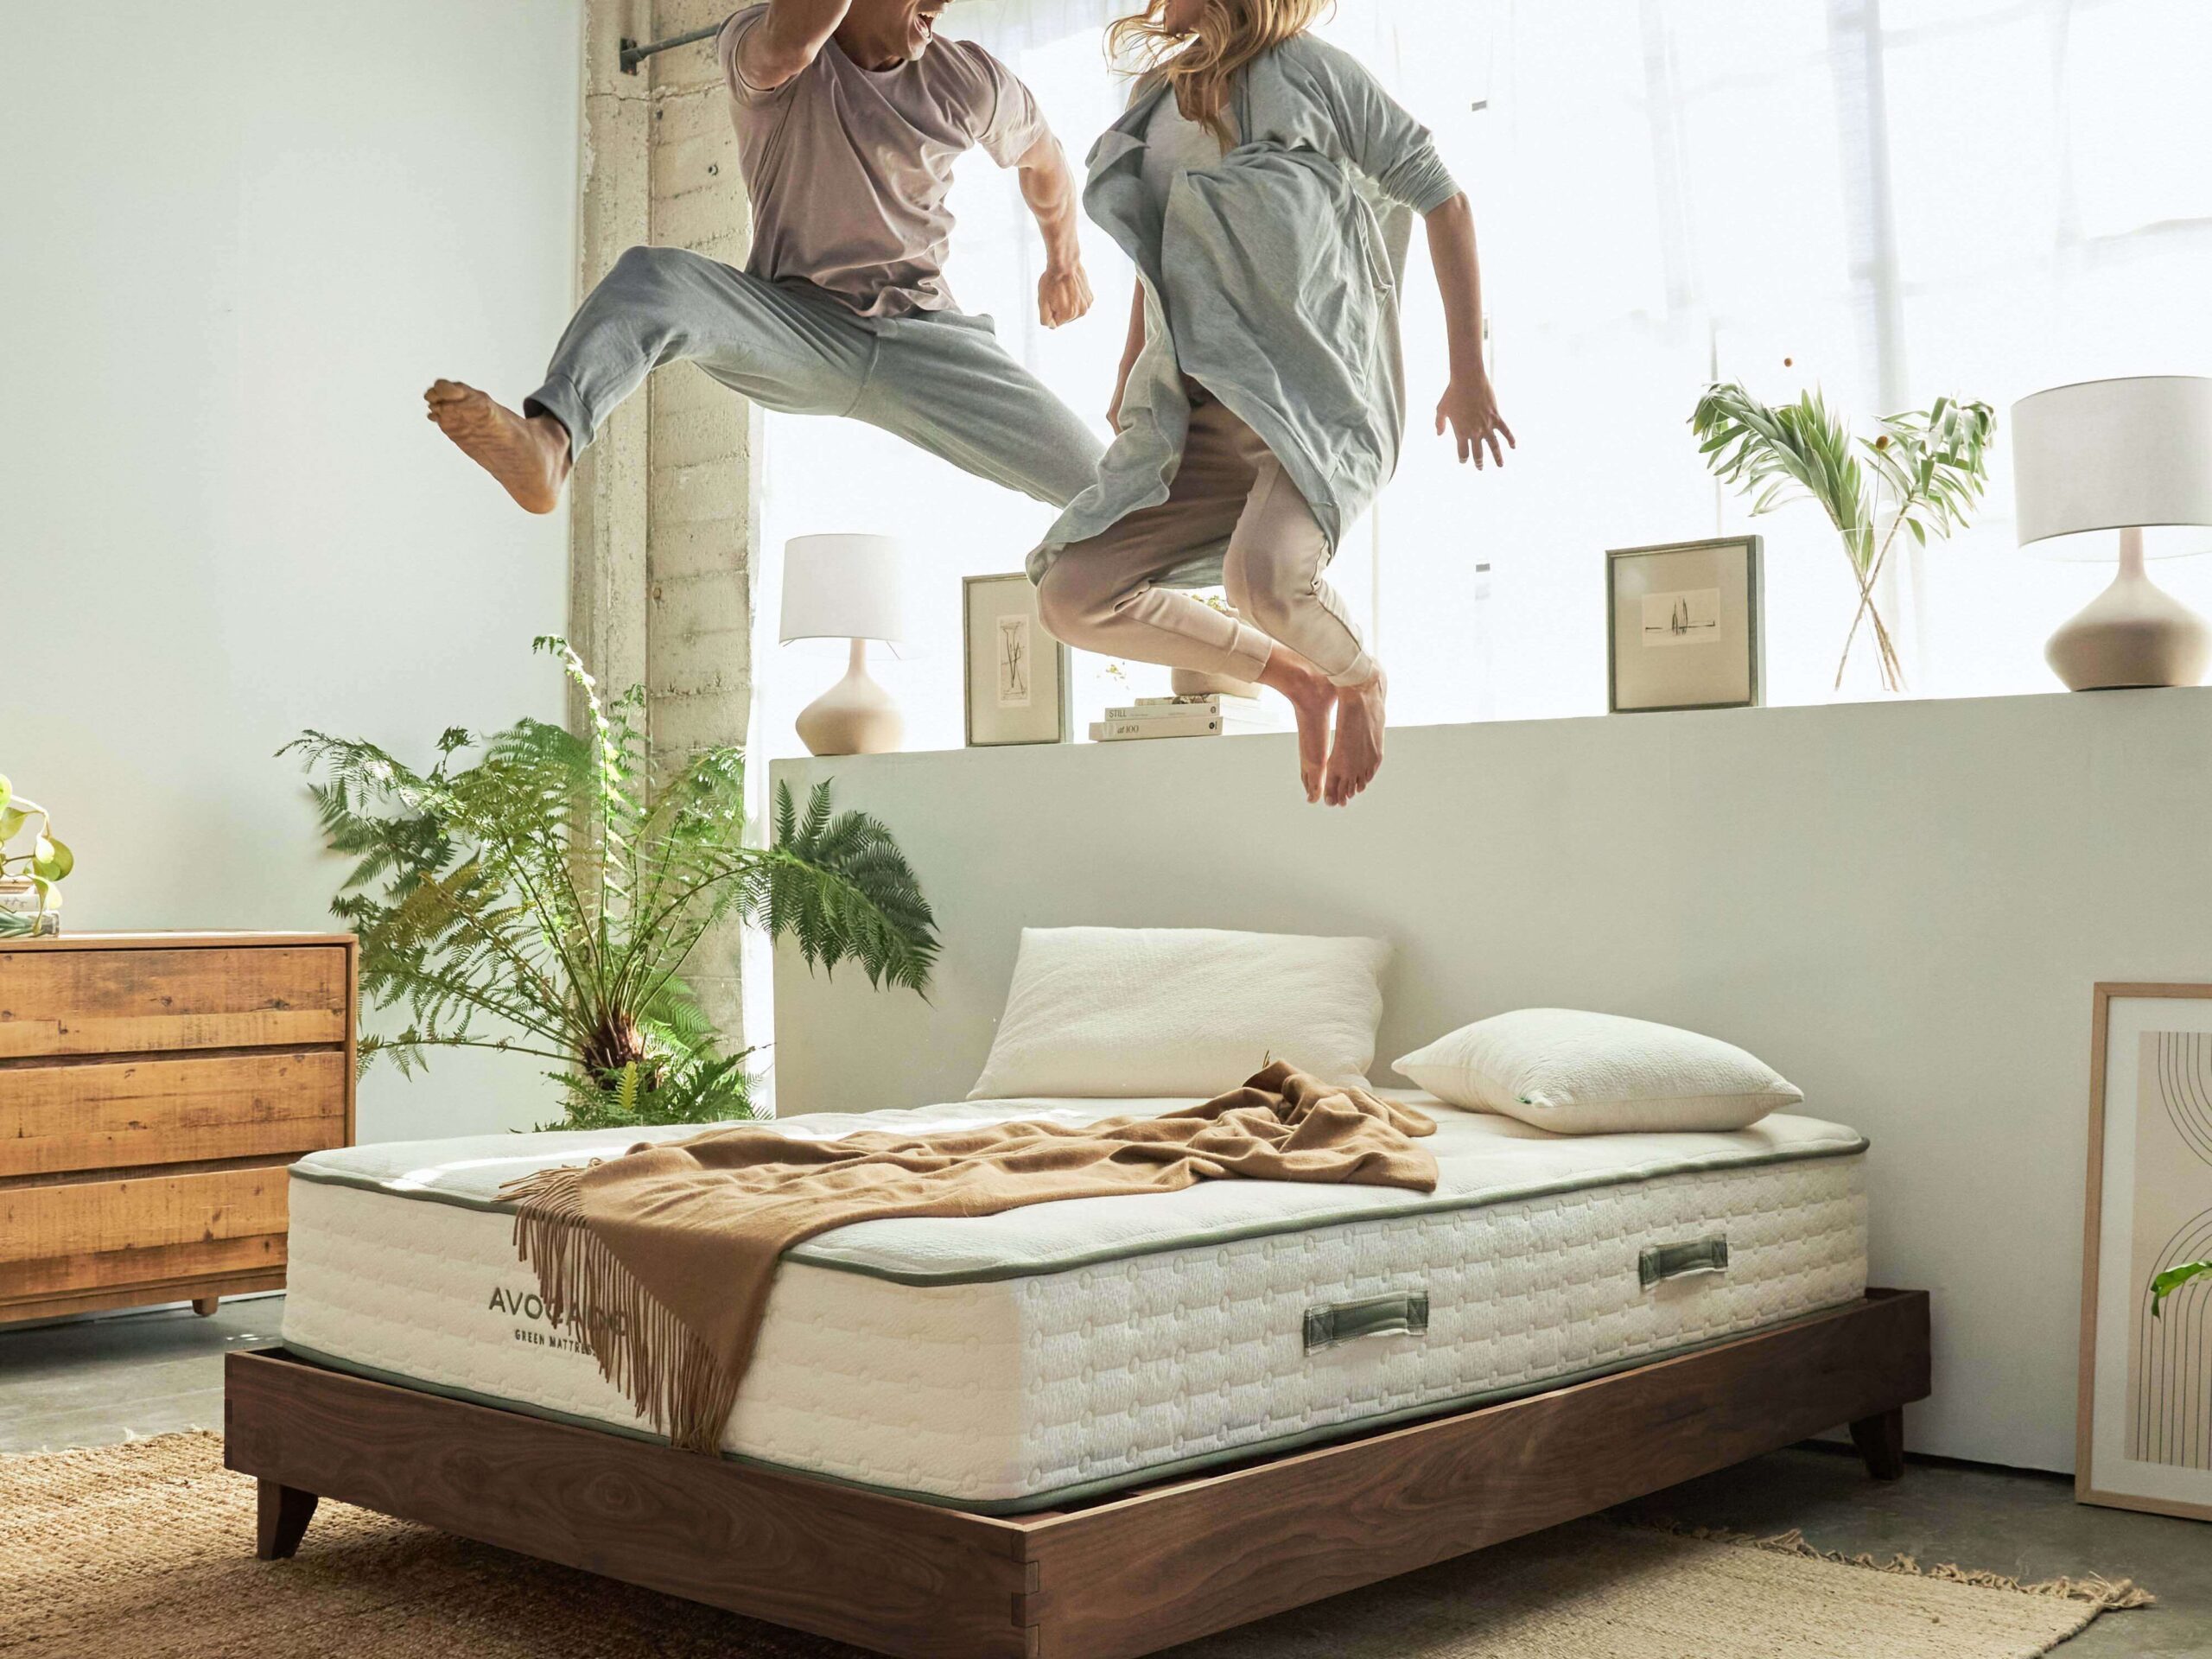 Sustainable wooden bed frame